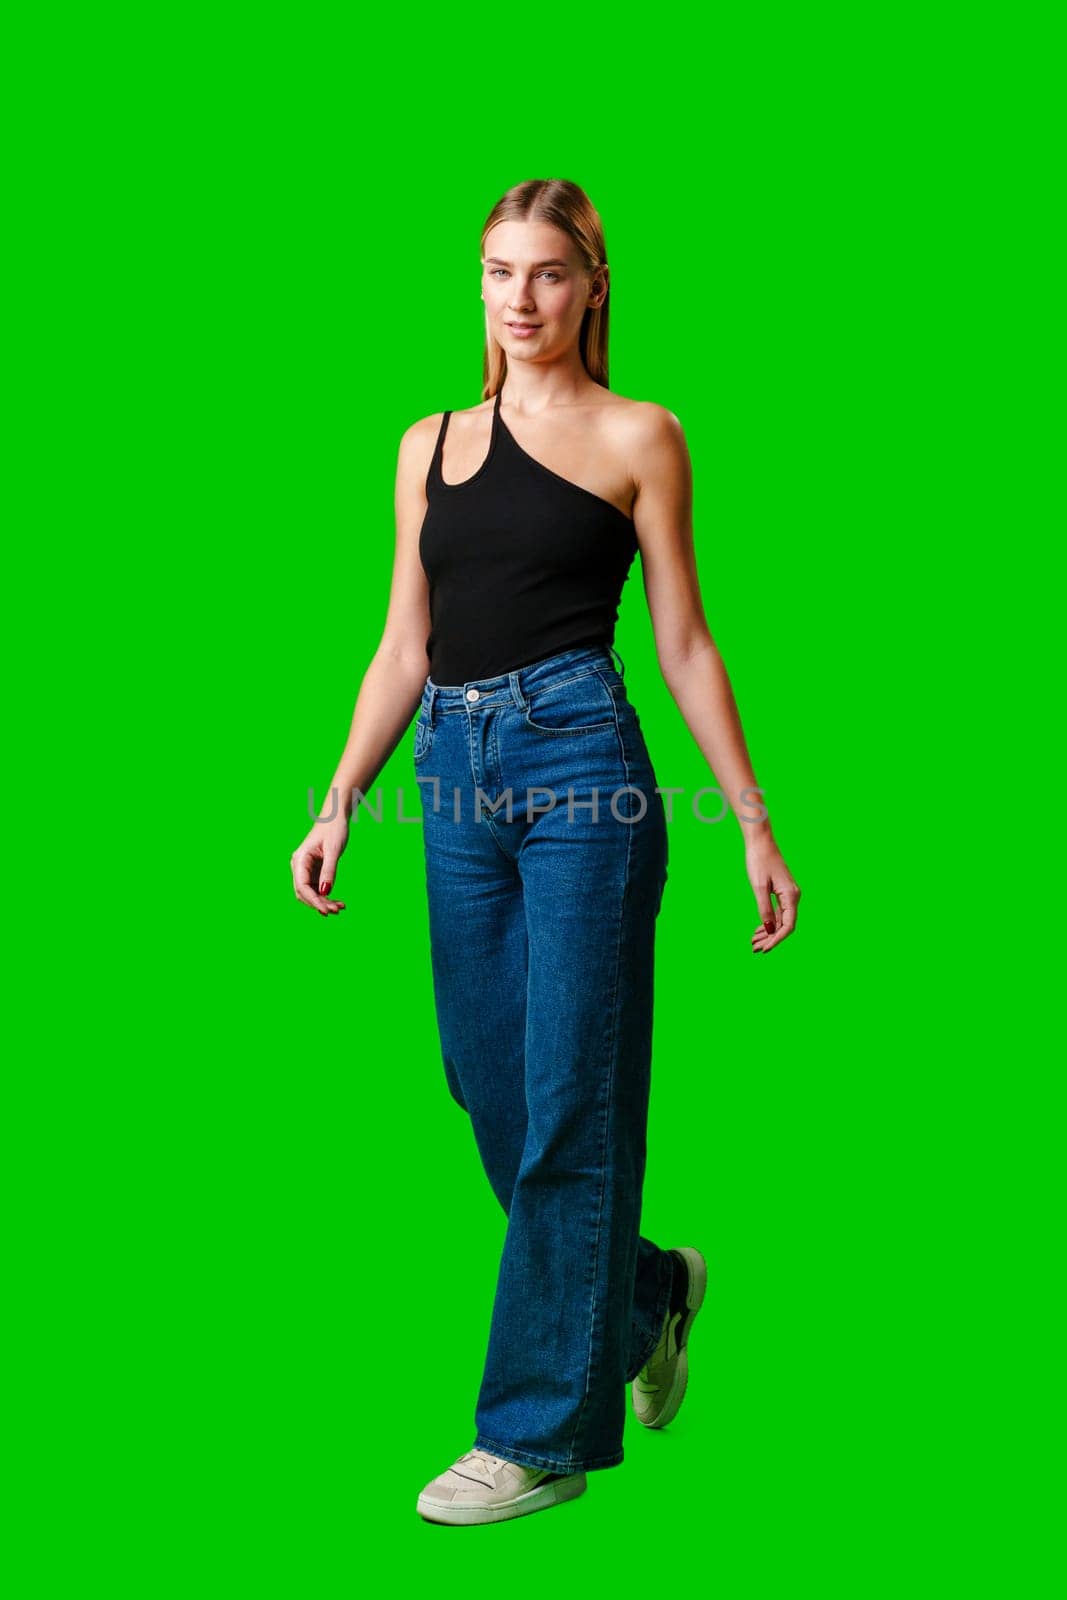 Blonde Woman in Black Tank Top Posing for Picture in studio